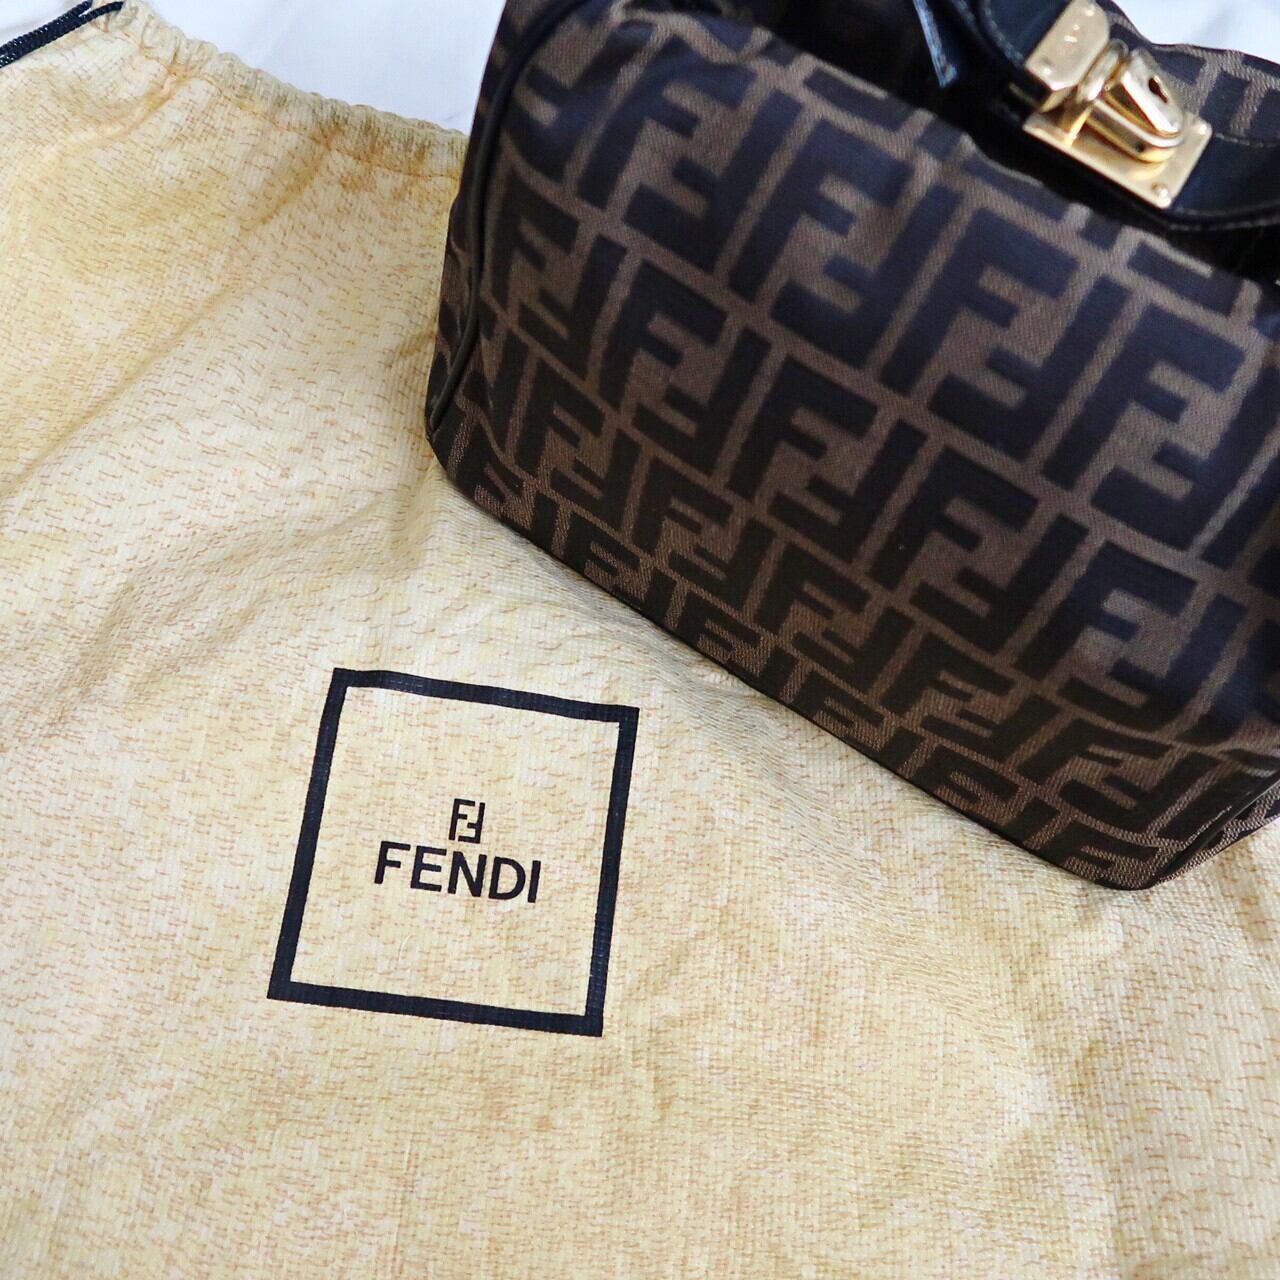 ONLY ONE【VINTAGE ACCESSORY】FENDI ズッカ柄 バニティバッグ 鍵なし | annvintage powered by  BASE